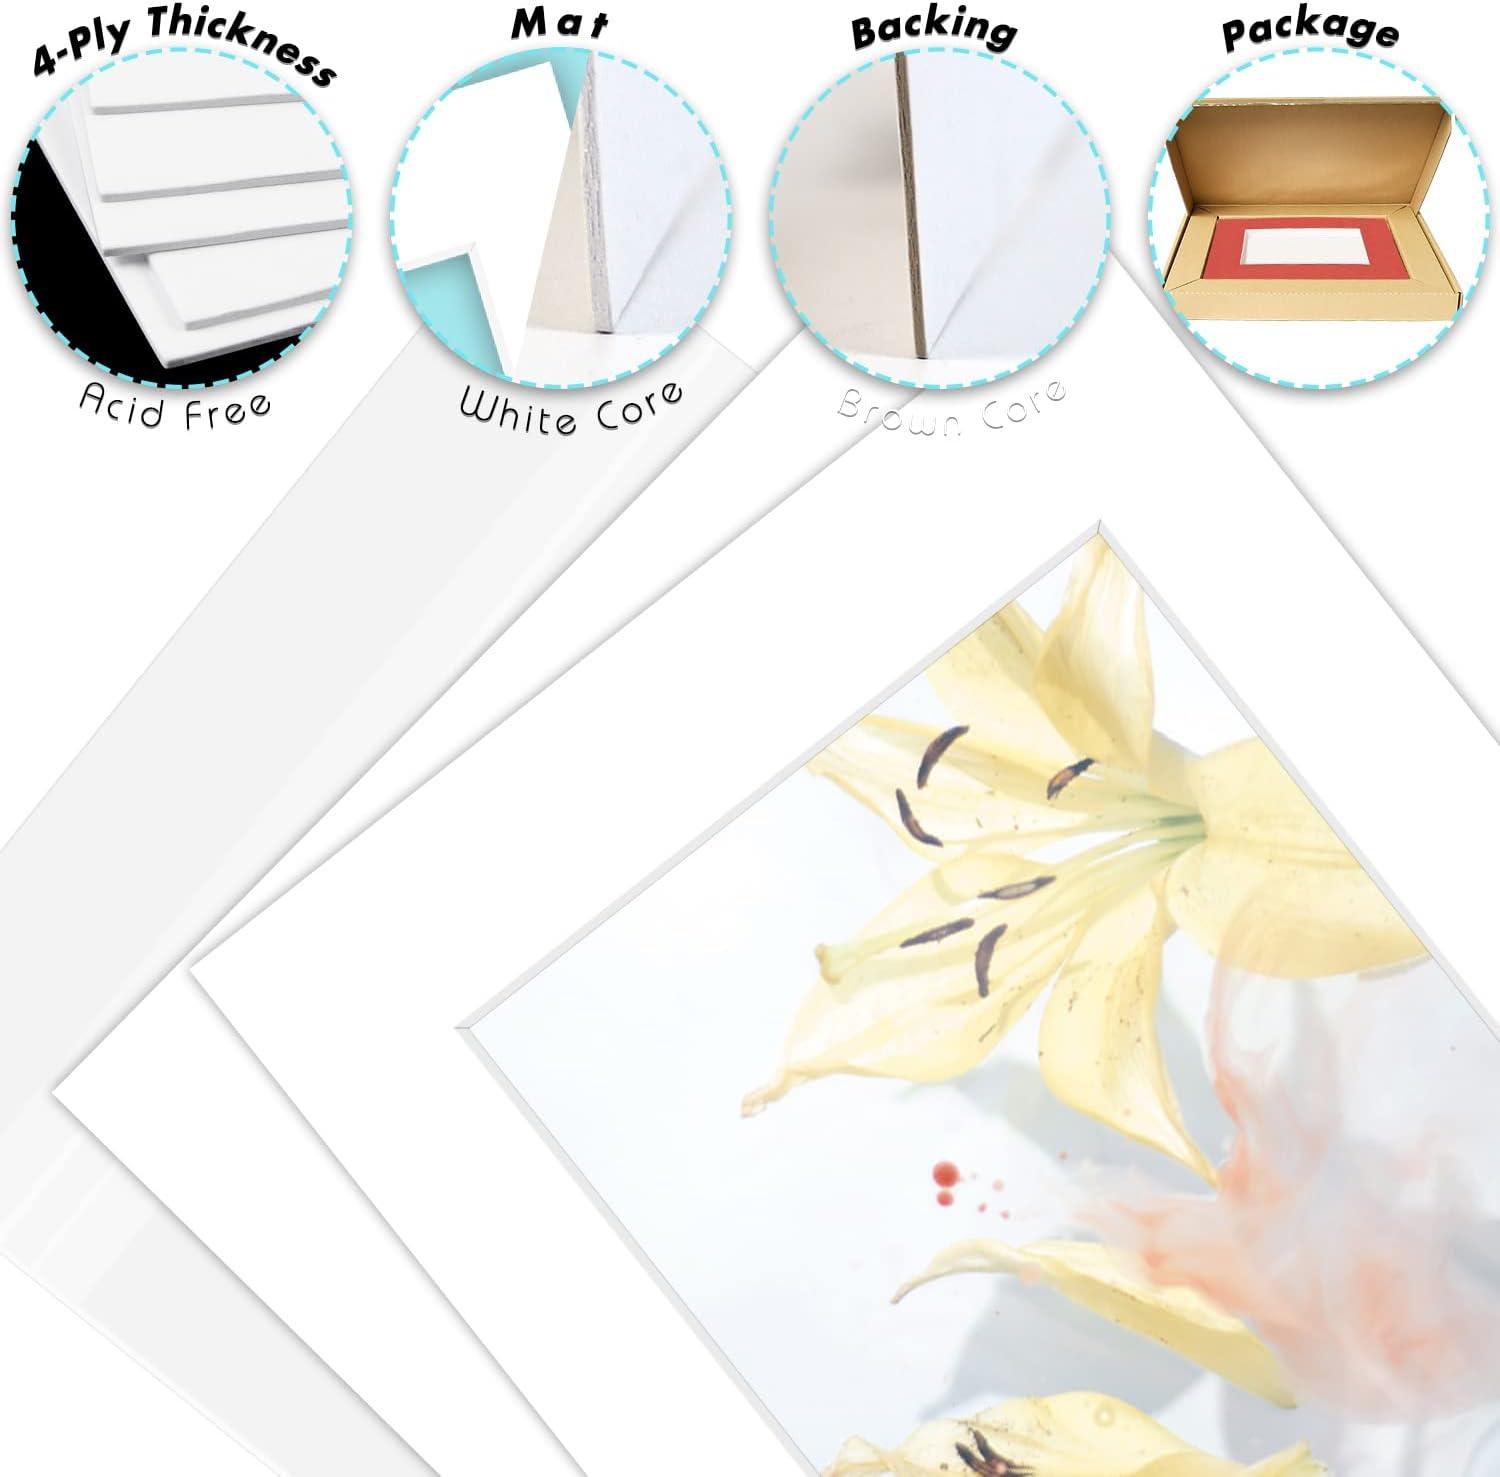 Acid-Free 5 Pack 8x10 Pre-Cut Mat Board Show Kit for 5x7 Photos, Prints or Artworks, 5 Core Bevel Cut Matts and 5 Backing Boards and 5 Crystal